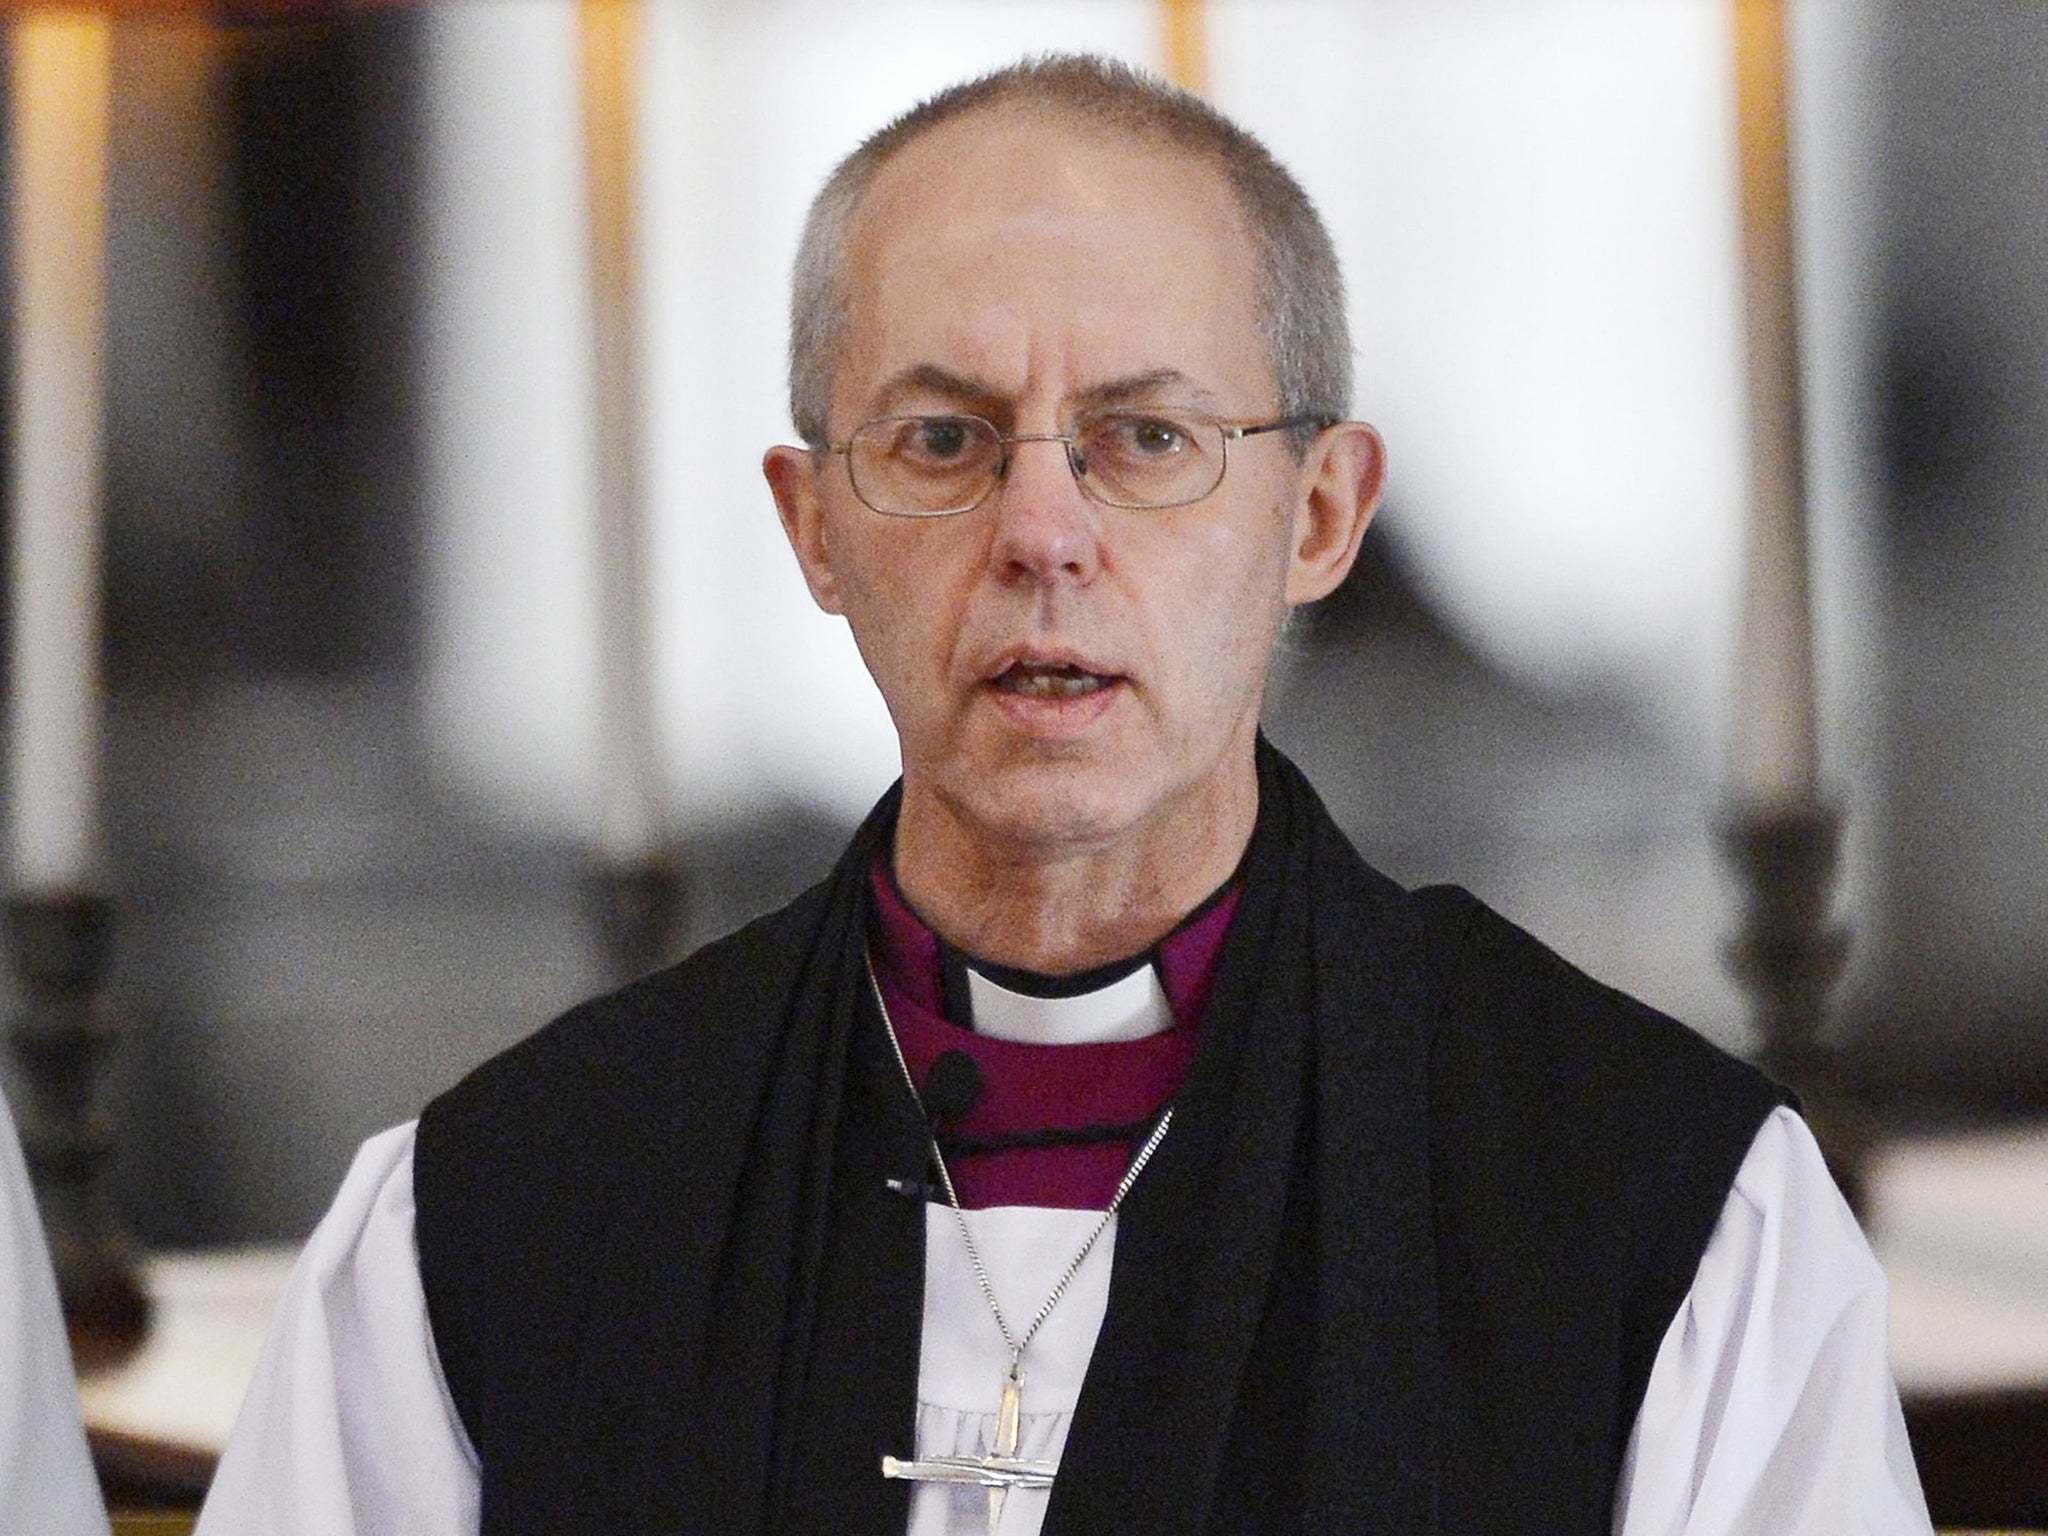 Archbishop of Canterbury Justin Welby will join the veteran anti-poverty campaigner Frank Field and others to launch a report on the current need for food banks